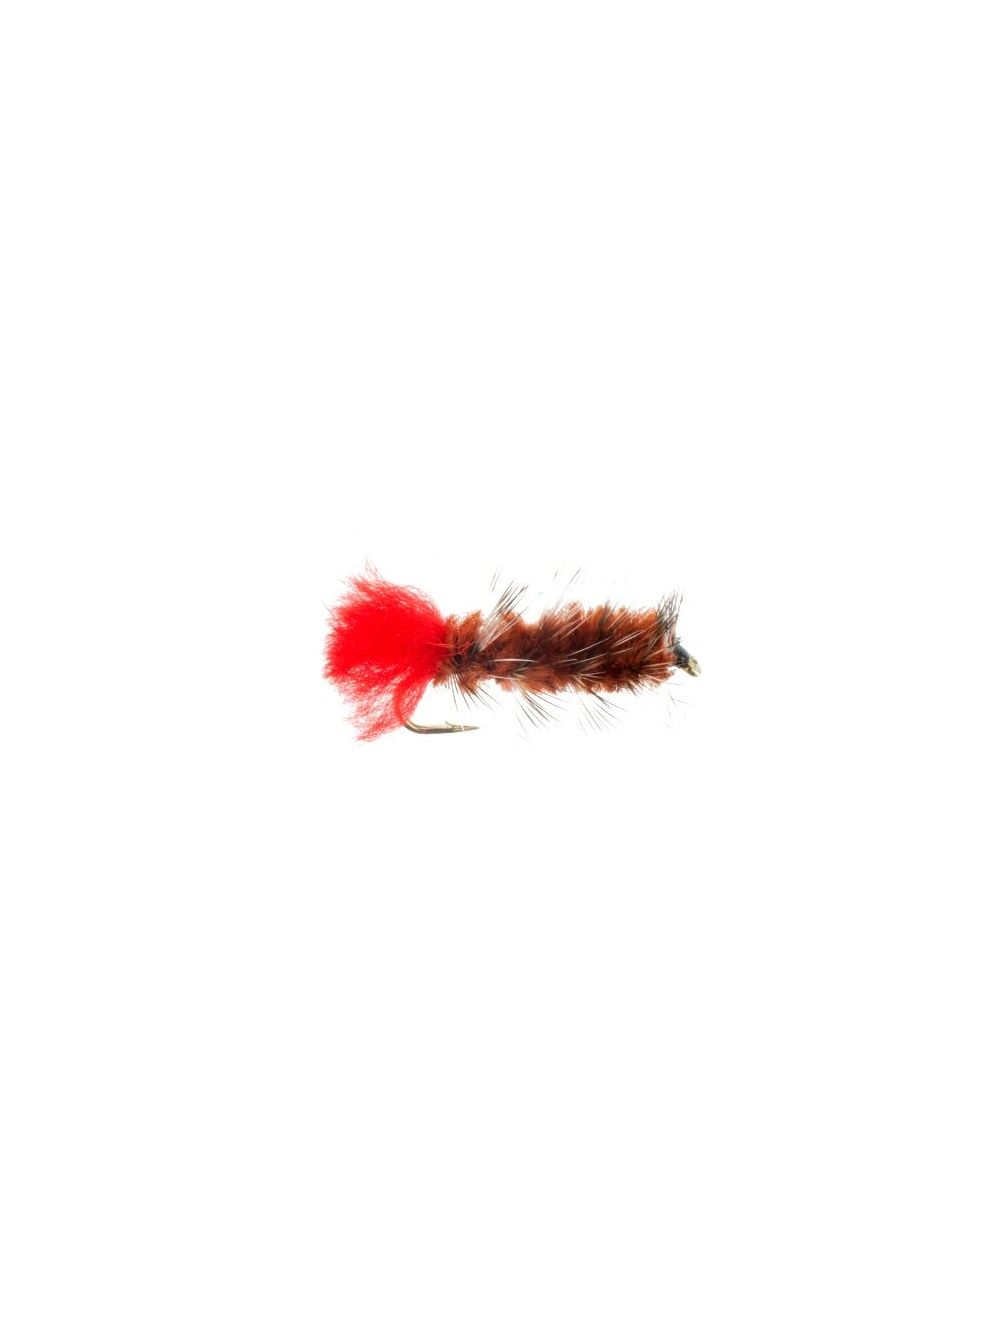 Woolly Worm, Brown